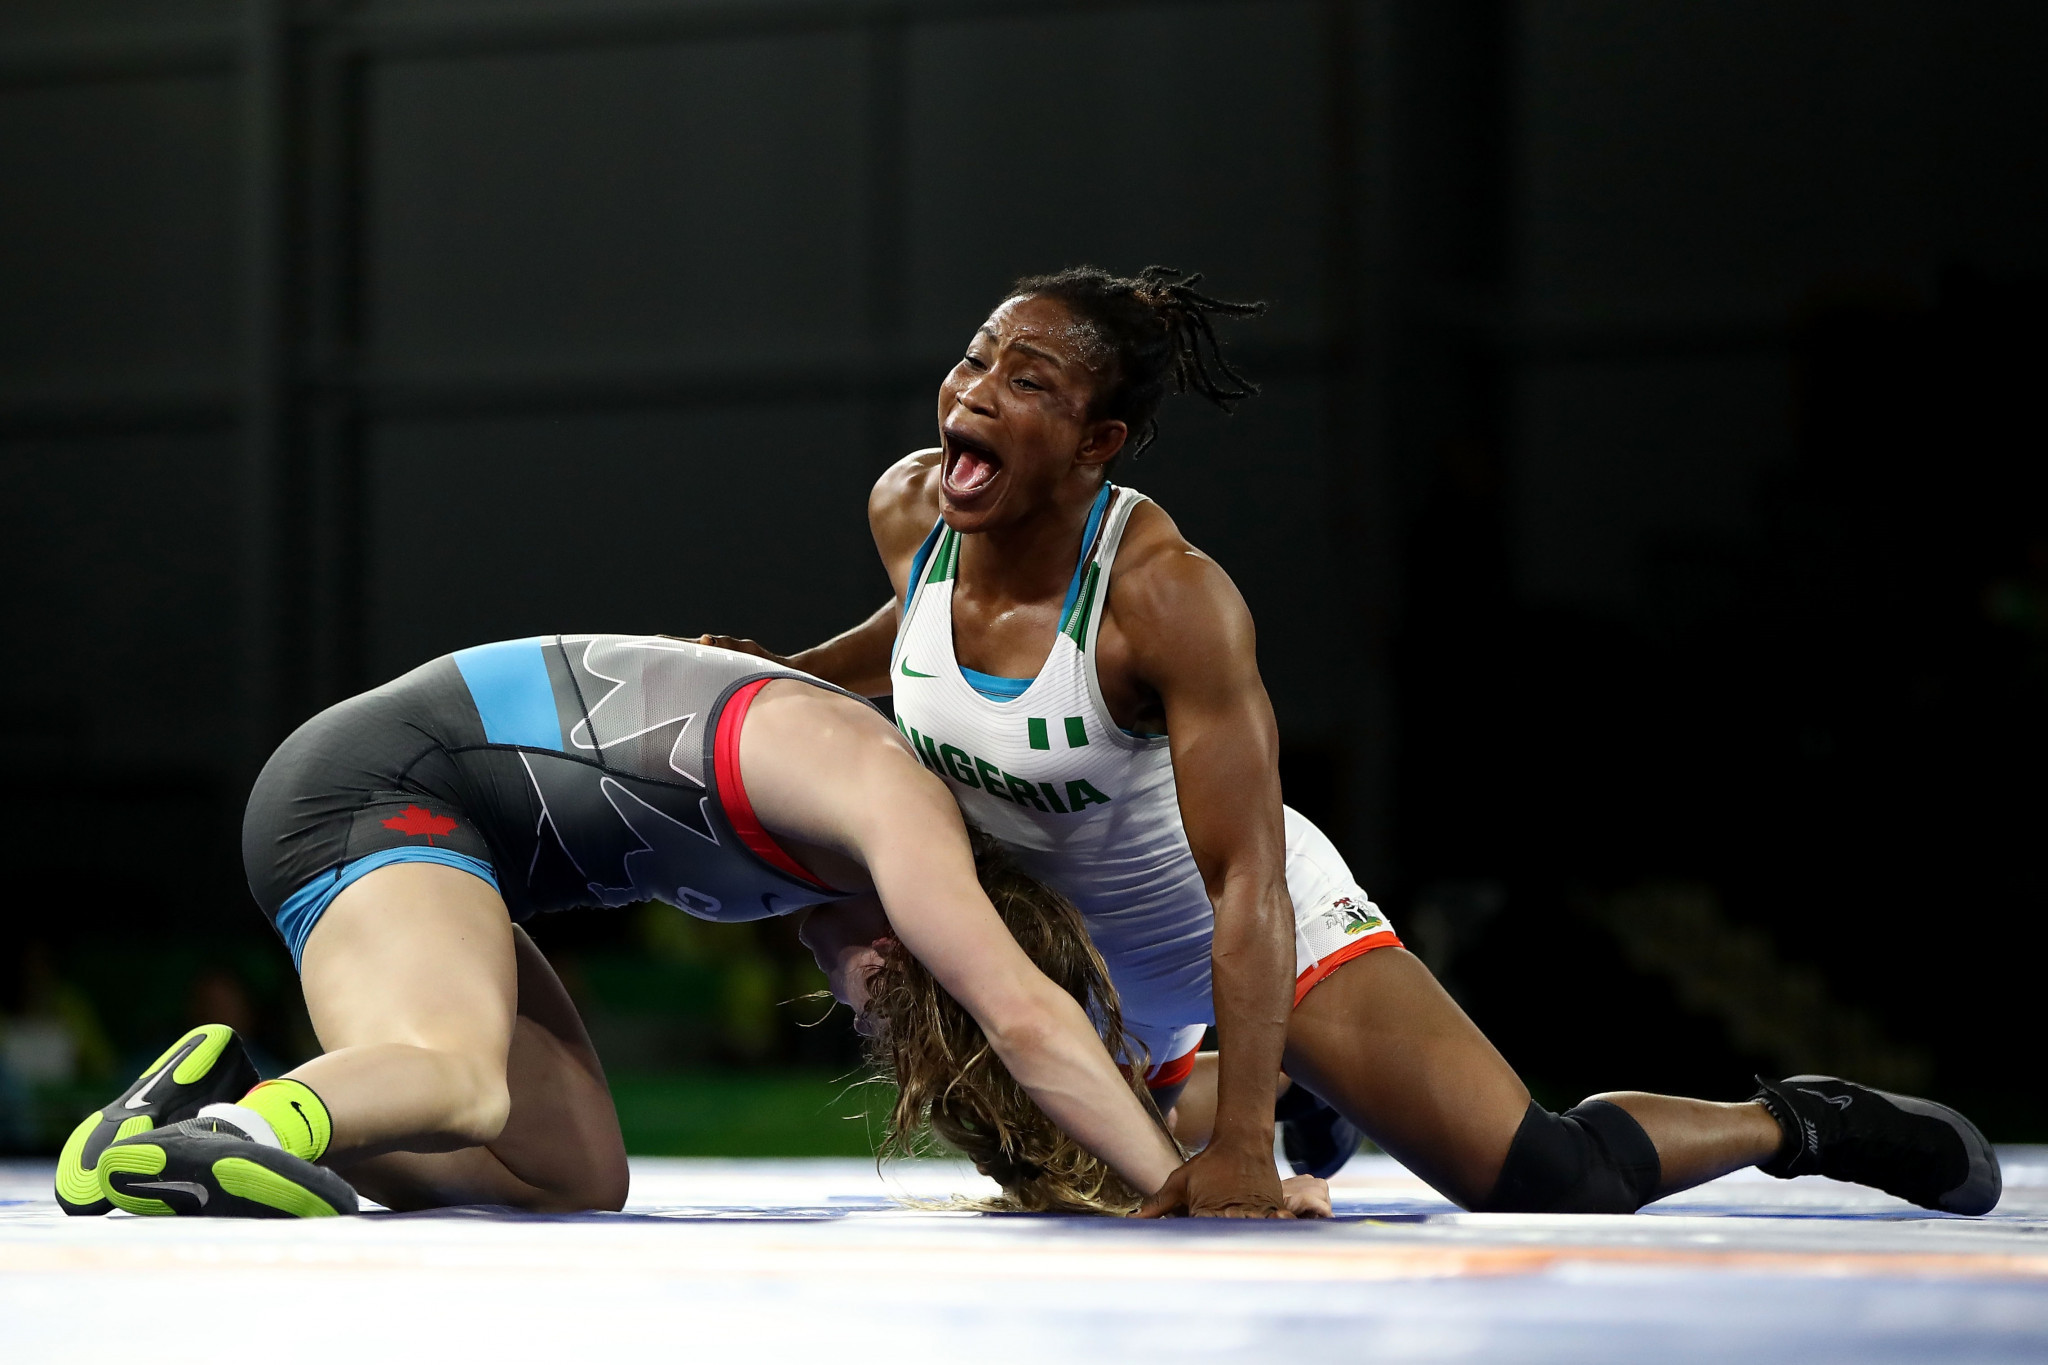 Nigeria dominated today's women's freestyle wrestling action with Blessing Oborududu winning the 68 kilograms title ©Getty Images